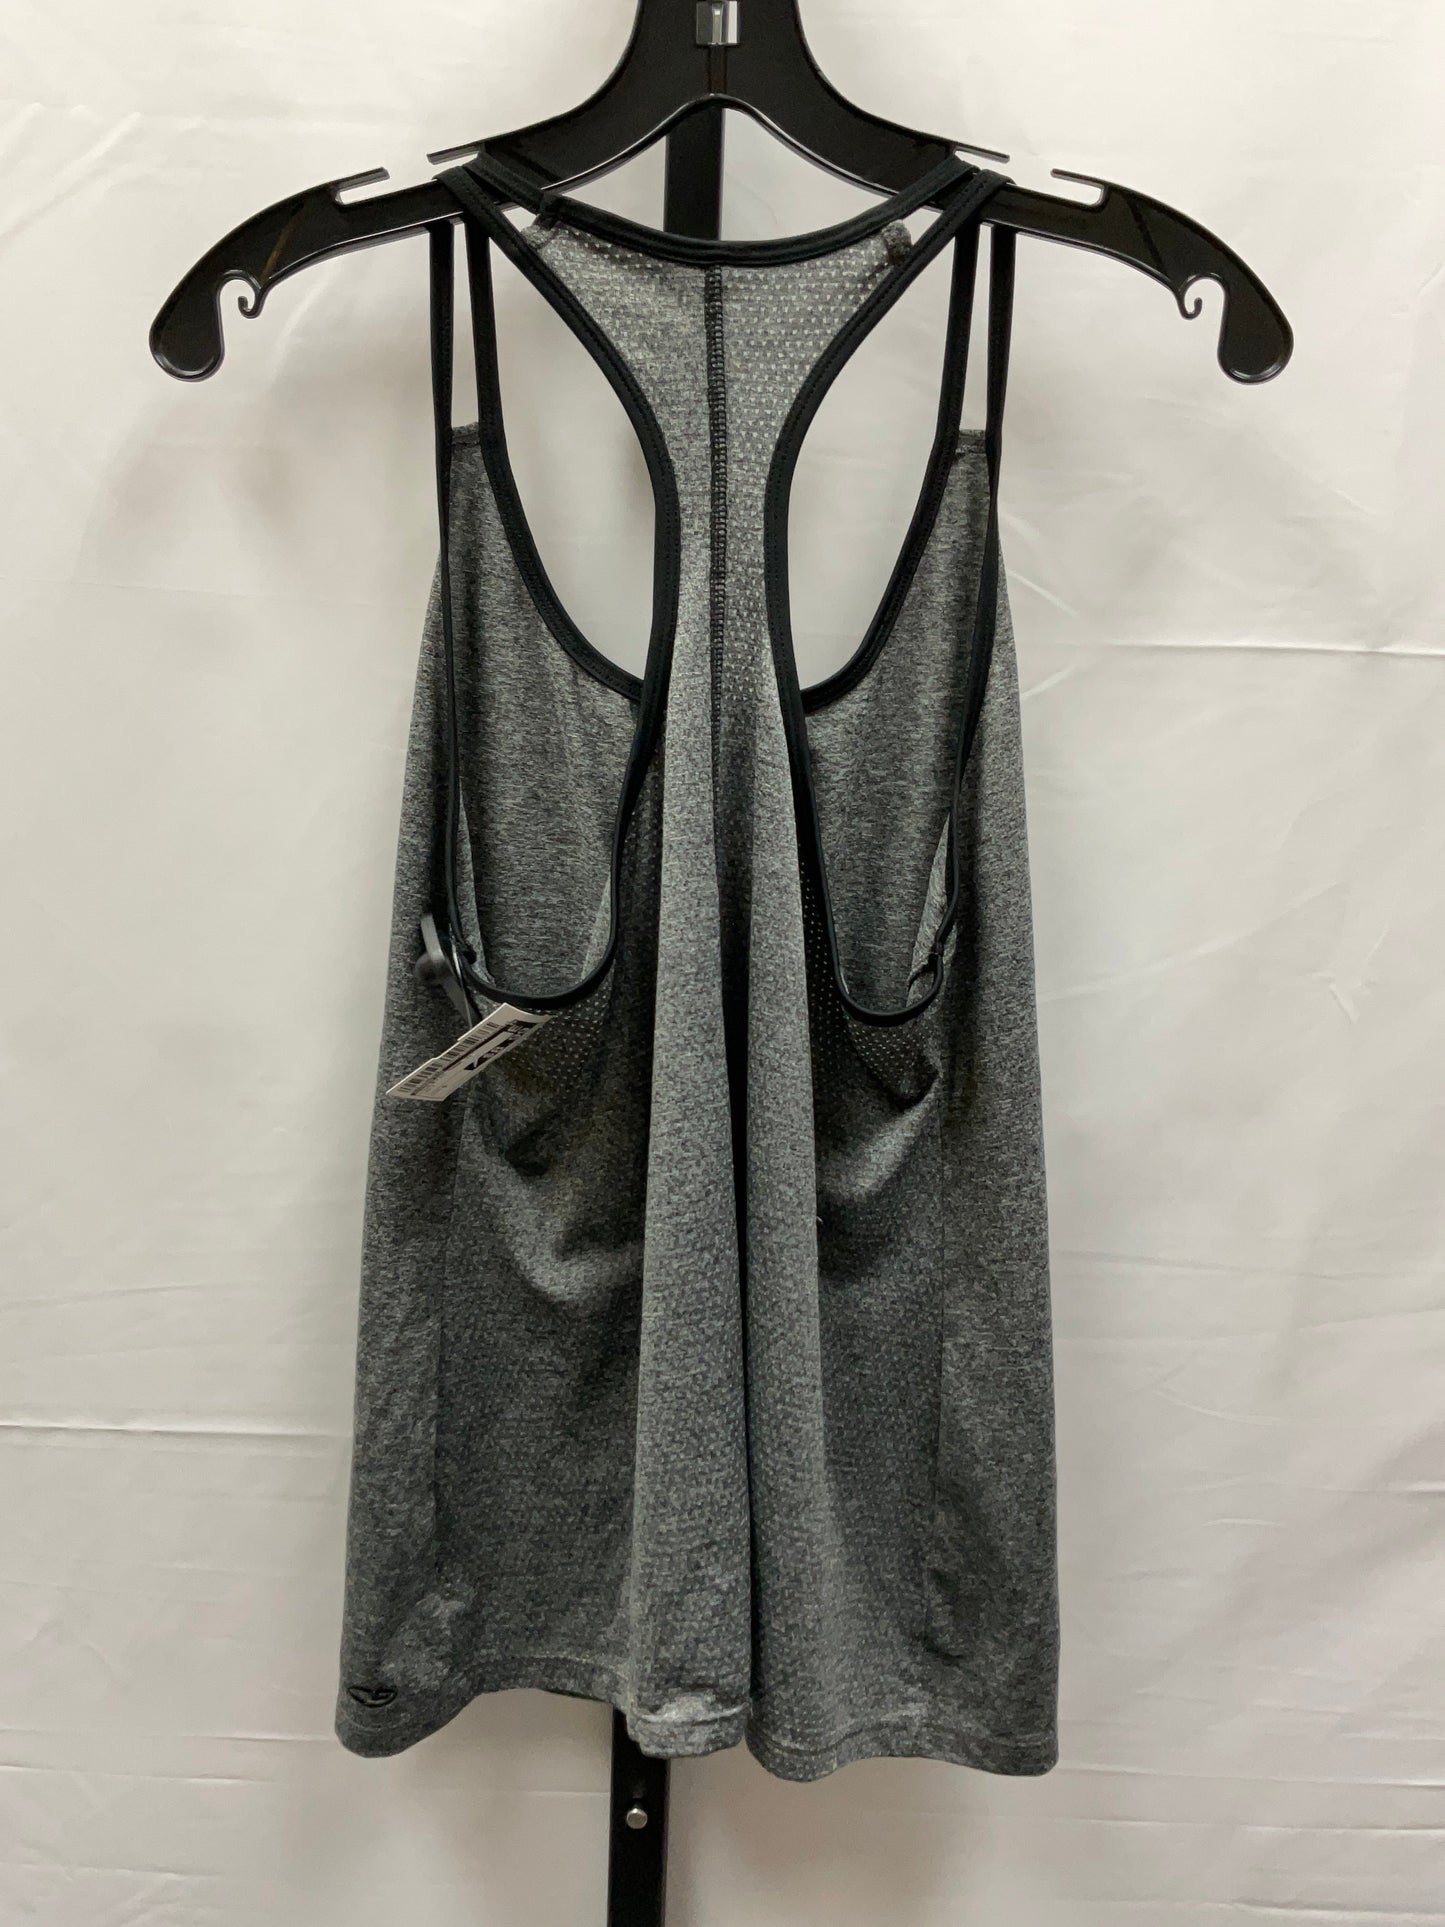 Grey Athletic Tank Top Champion, Size S